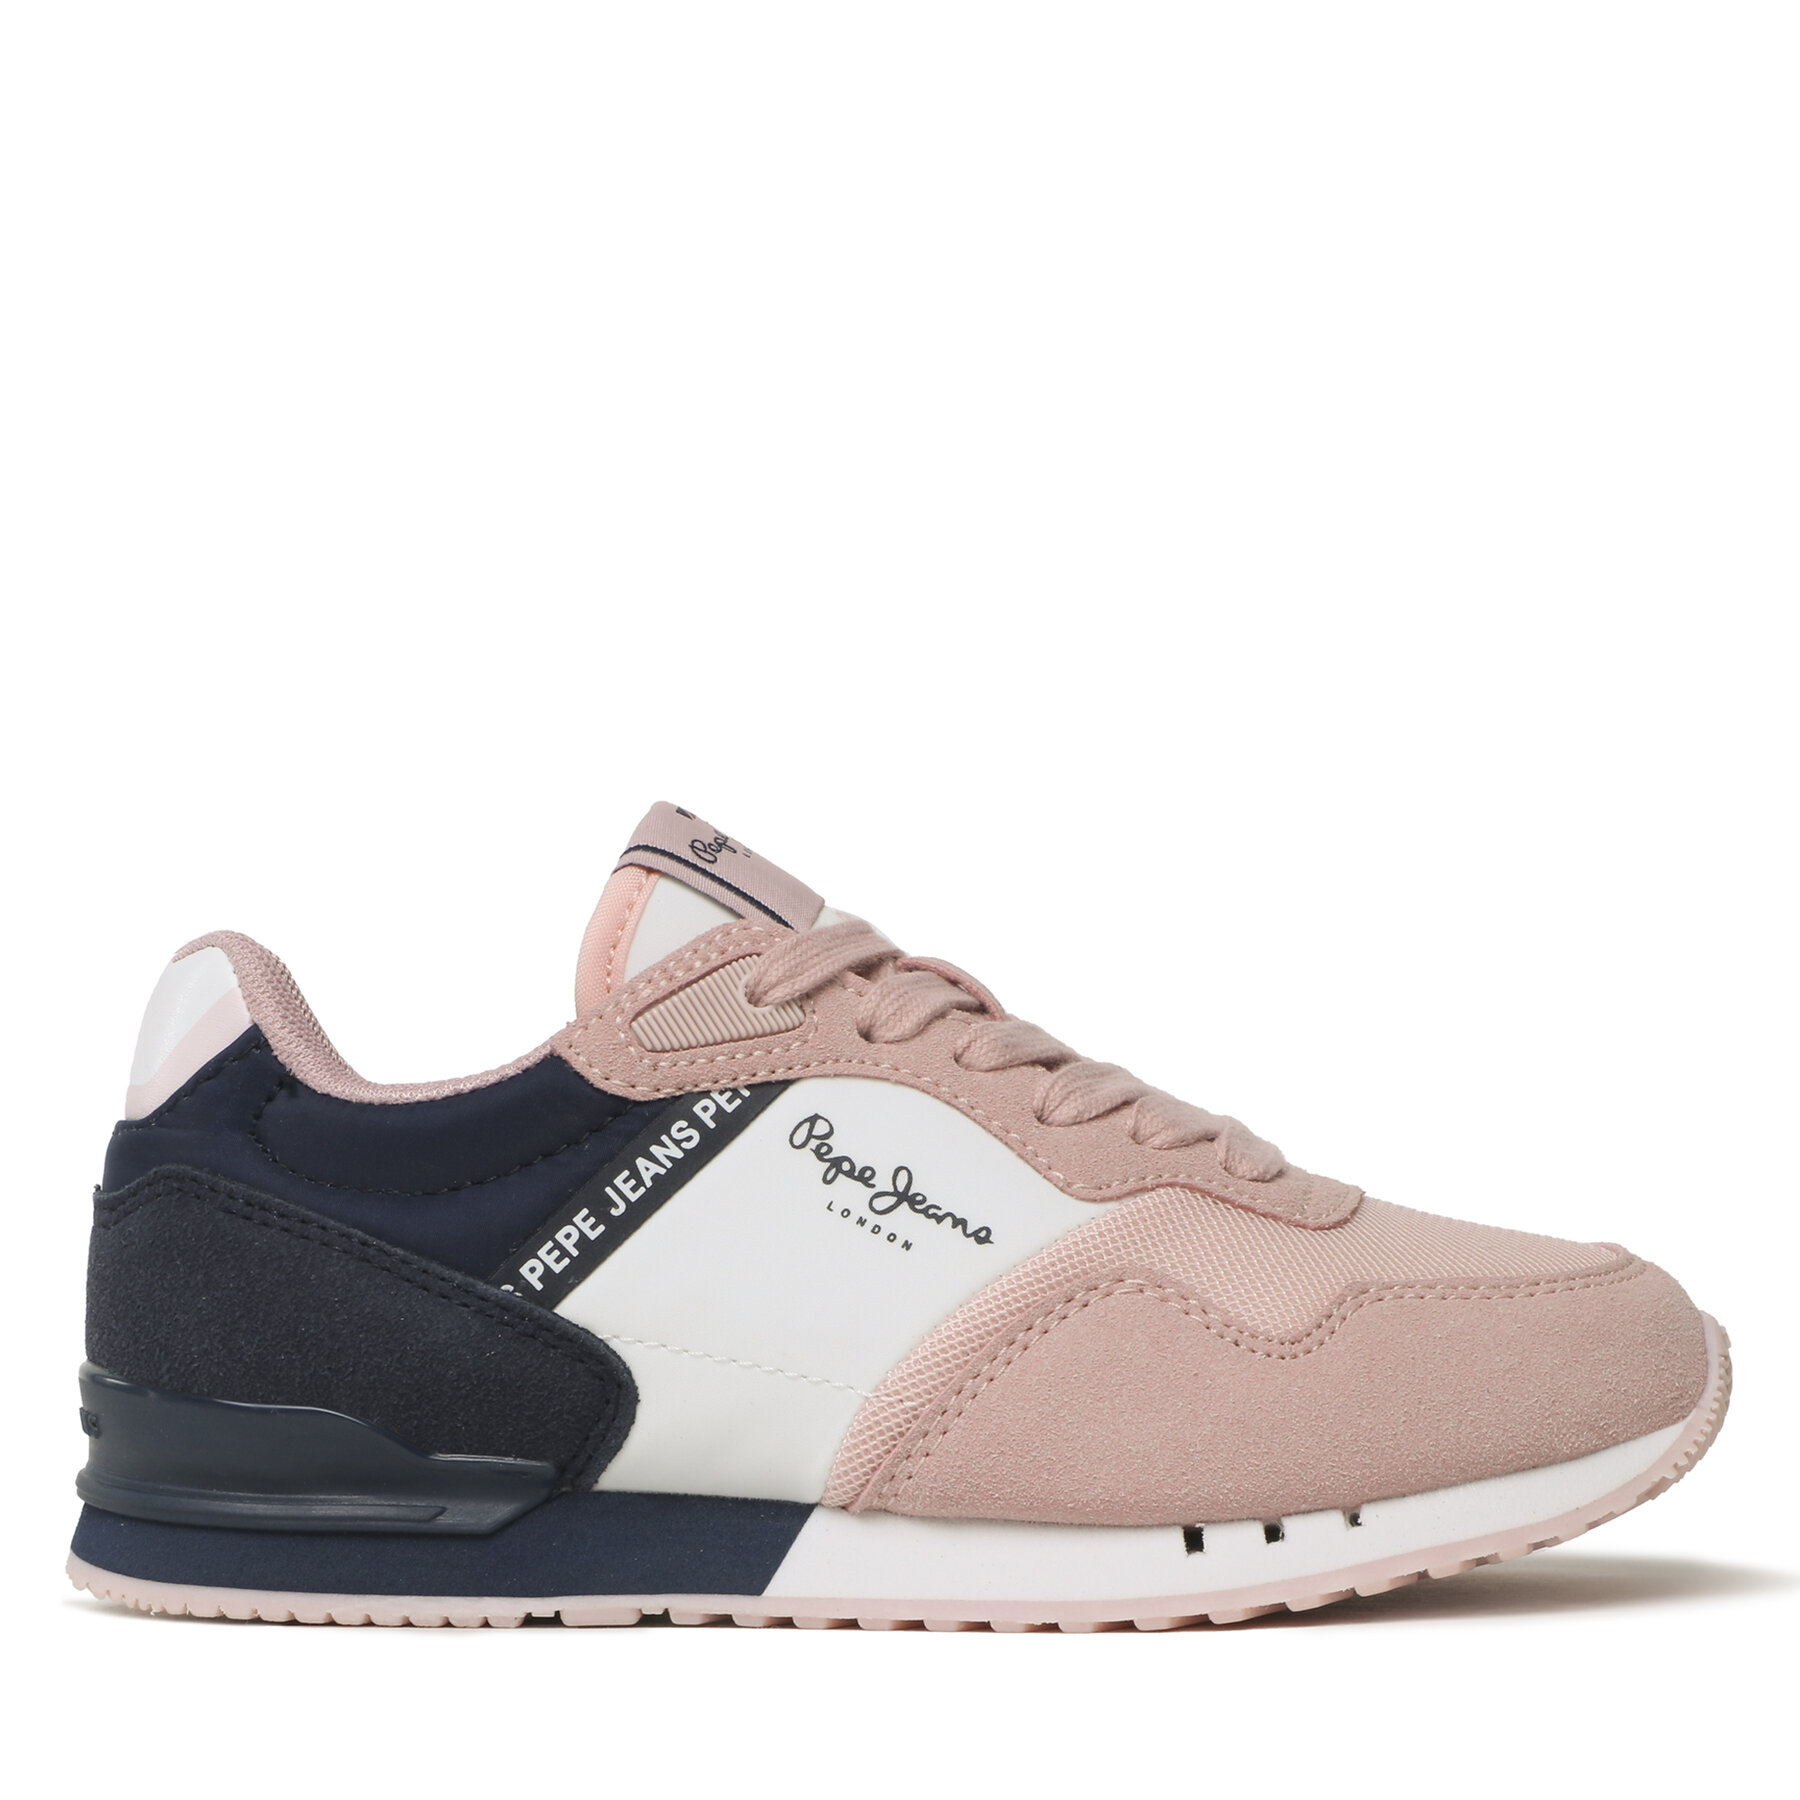 Sneakers Pepe Jeans London Basic G PGS30564 Soft Pink 305 von Pepe Jeans